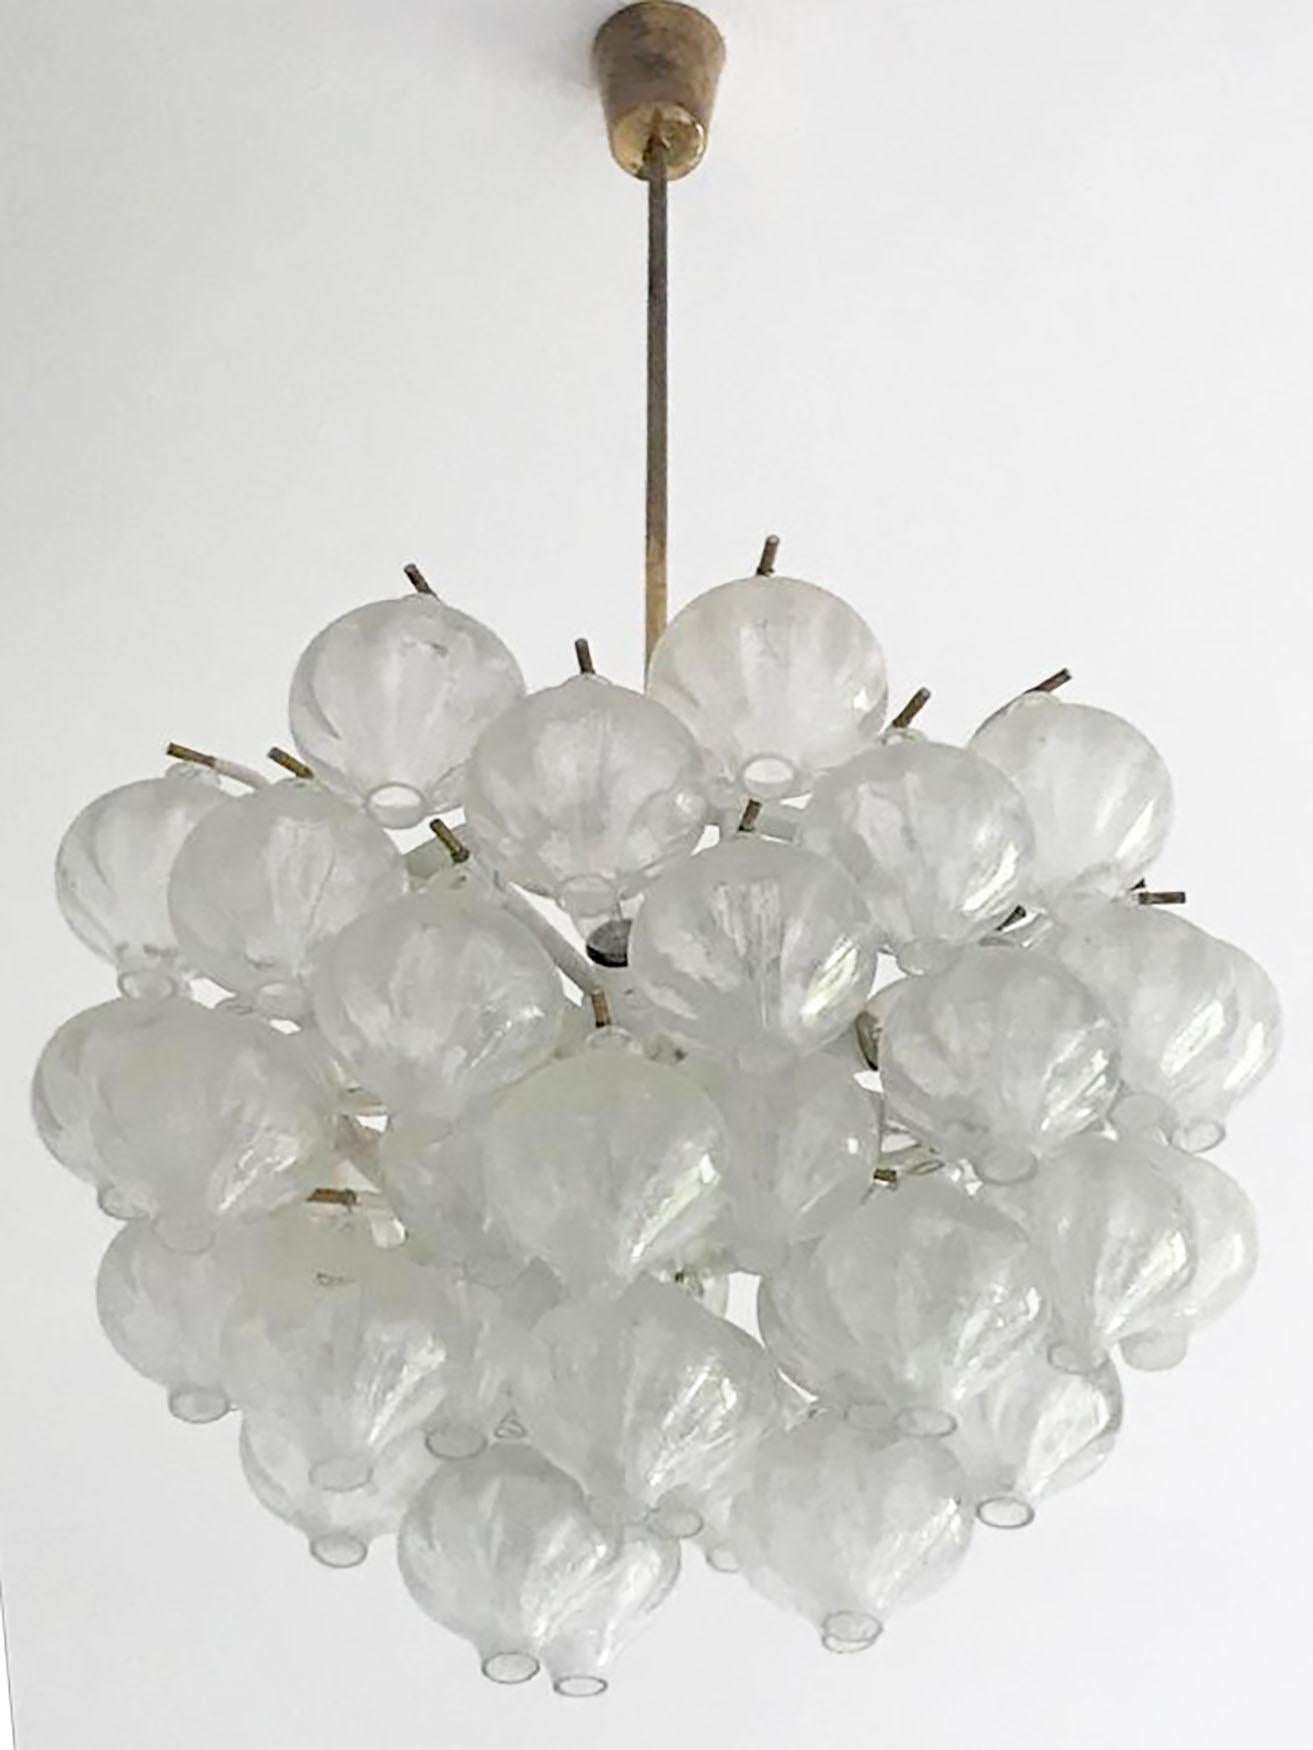 This Fantastic Austrian Mid-Century Modern Kalmar Tulipan chandelier or Pendant Lamp has been designed by J.T. Kalmar for Kalmar Vienna in the 1960s and consists of numerous blown tulipan glass elements which are highly saturated with tiny air